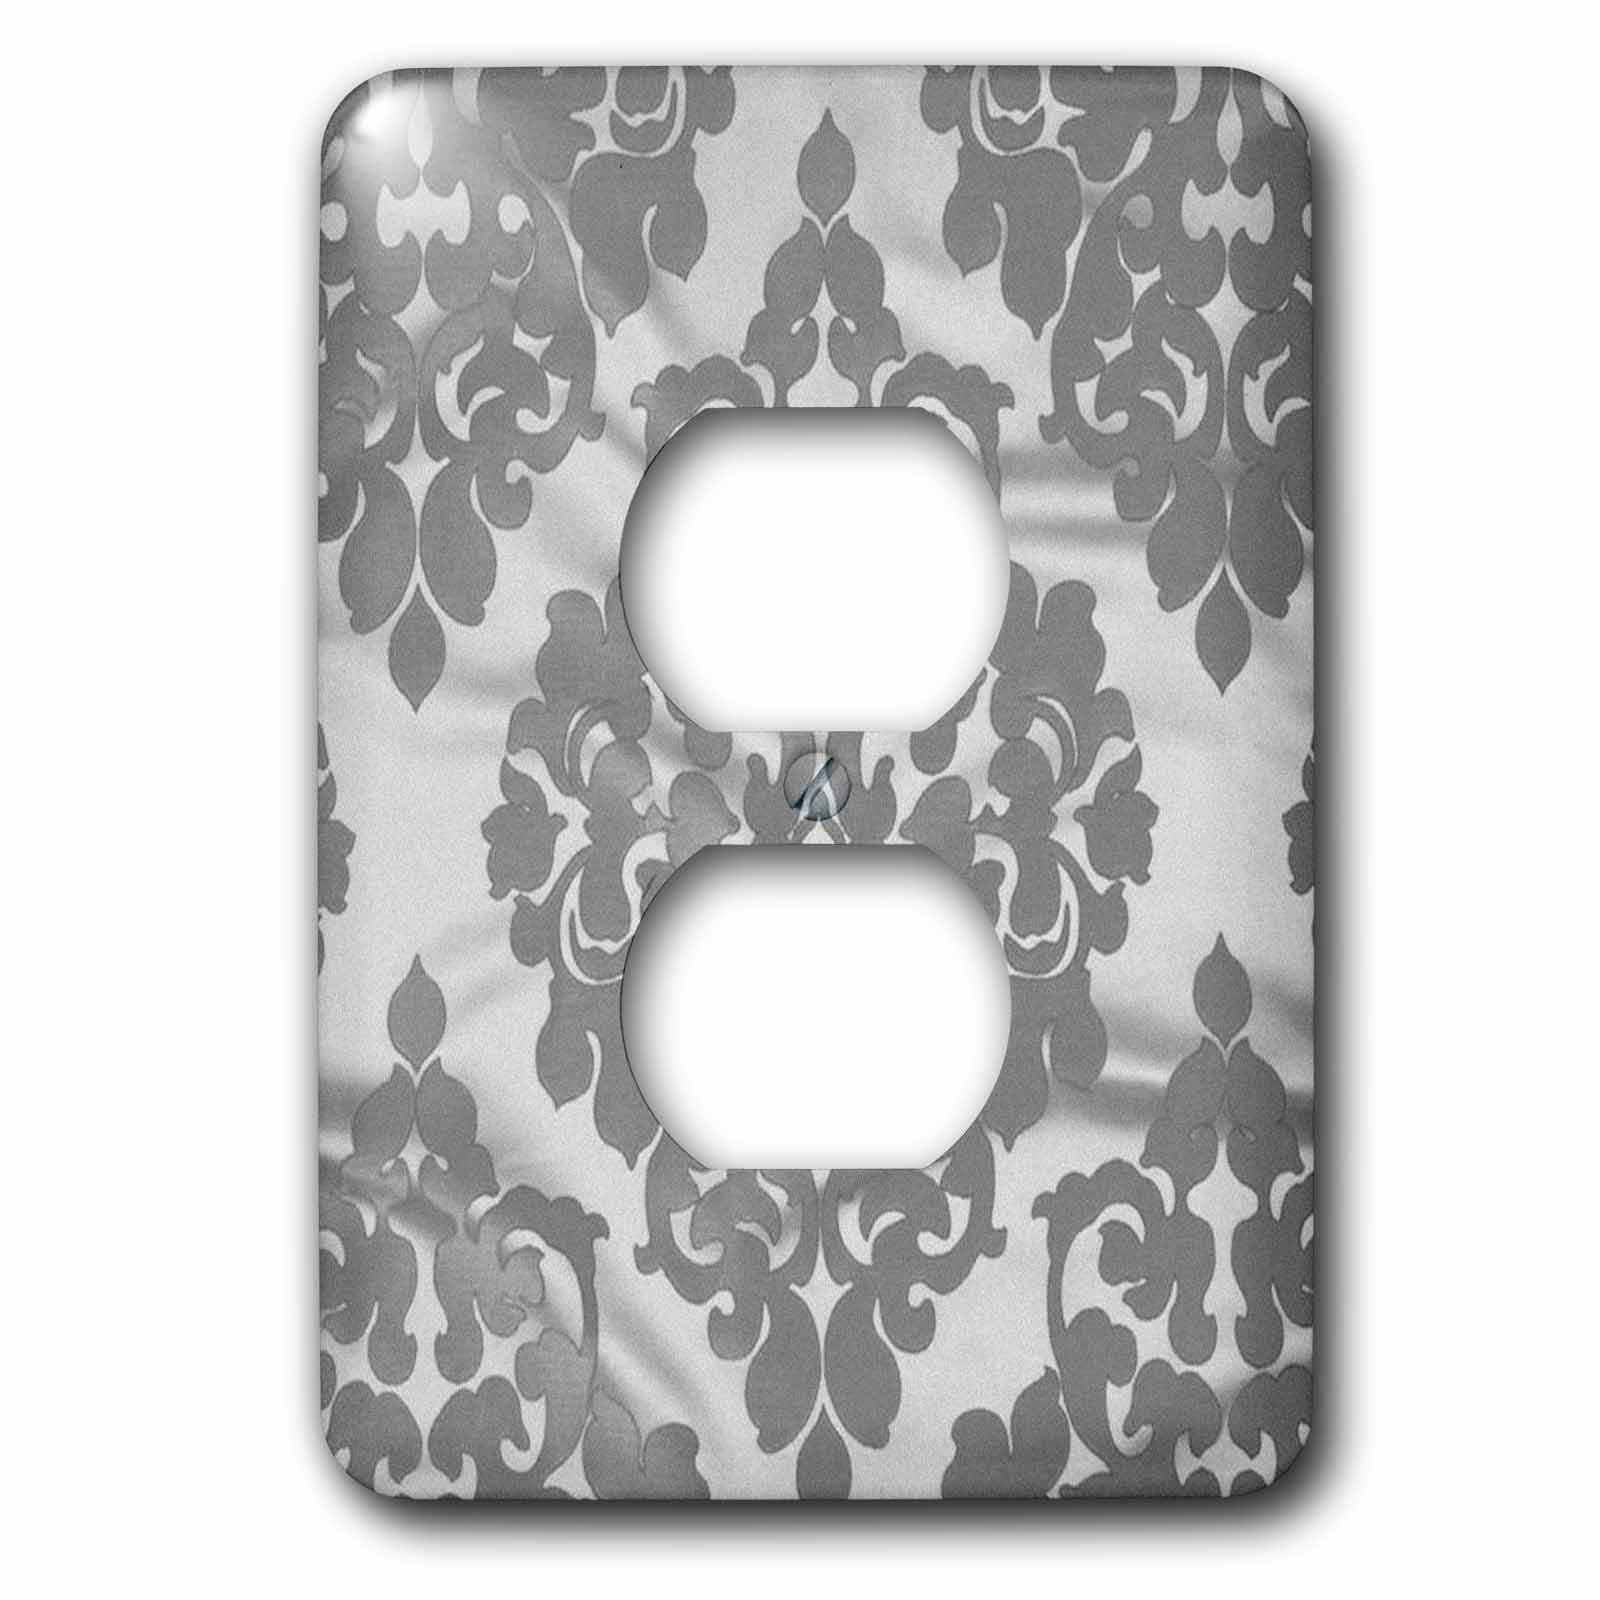 3dRose lsp_214527_6 Silver Damask Style 2 Plug Outlet Cover